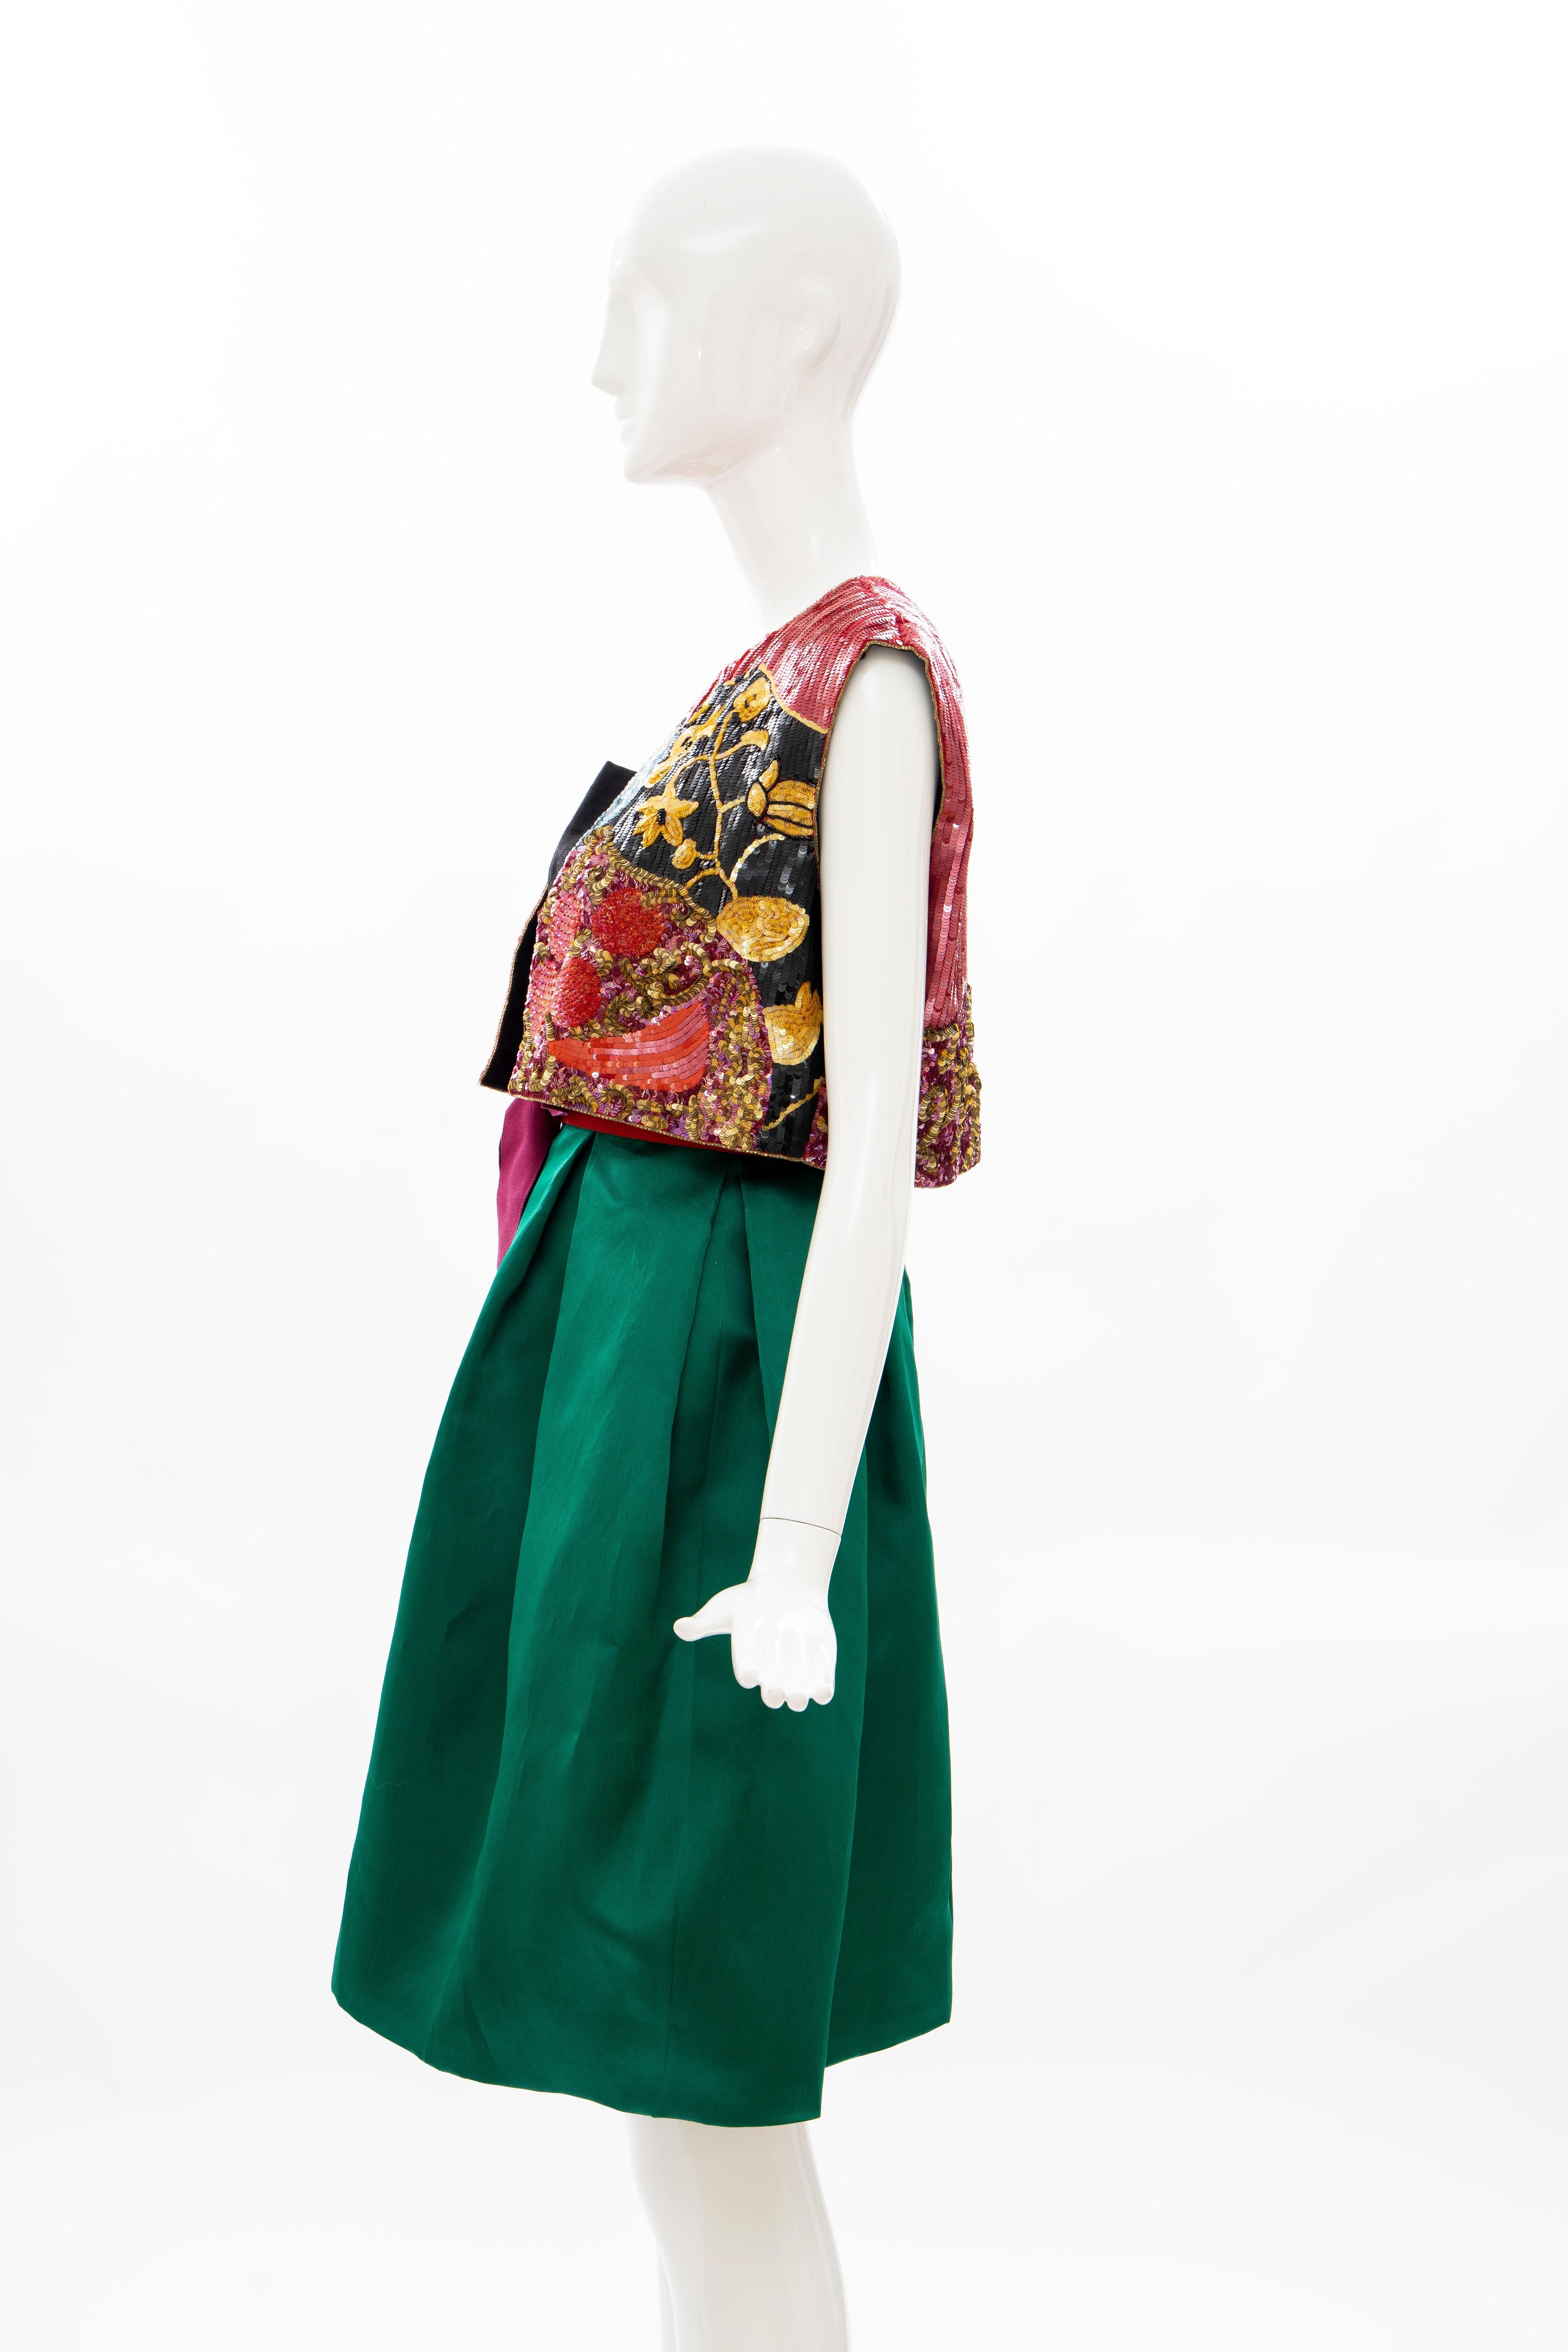 Bill Blass Matisse Inspired Embroidered Sequined Dress Ensemble, Spring 1988 For Sale 7